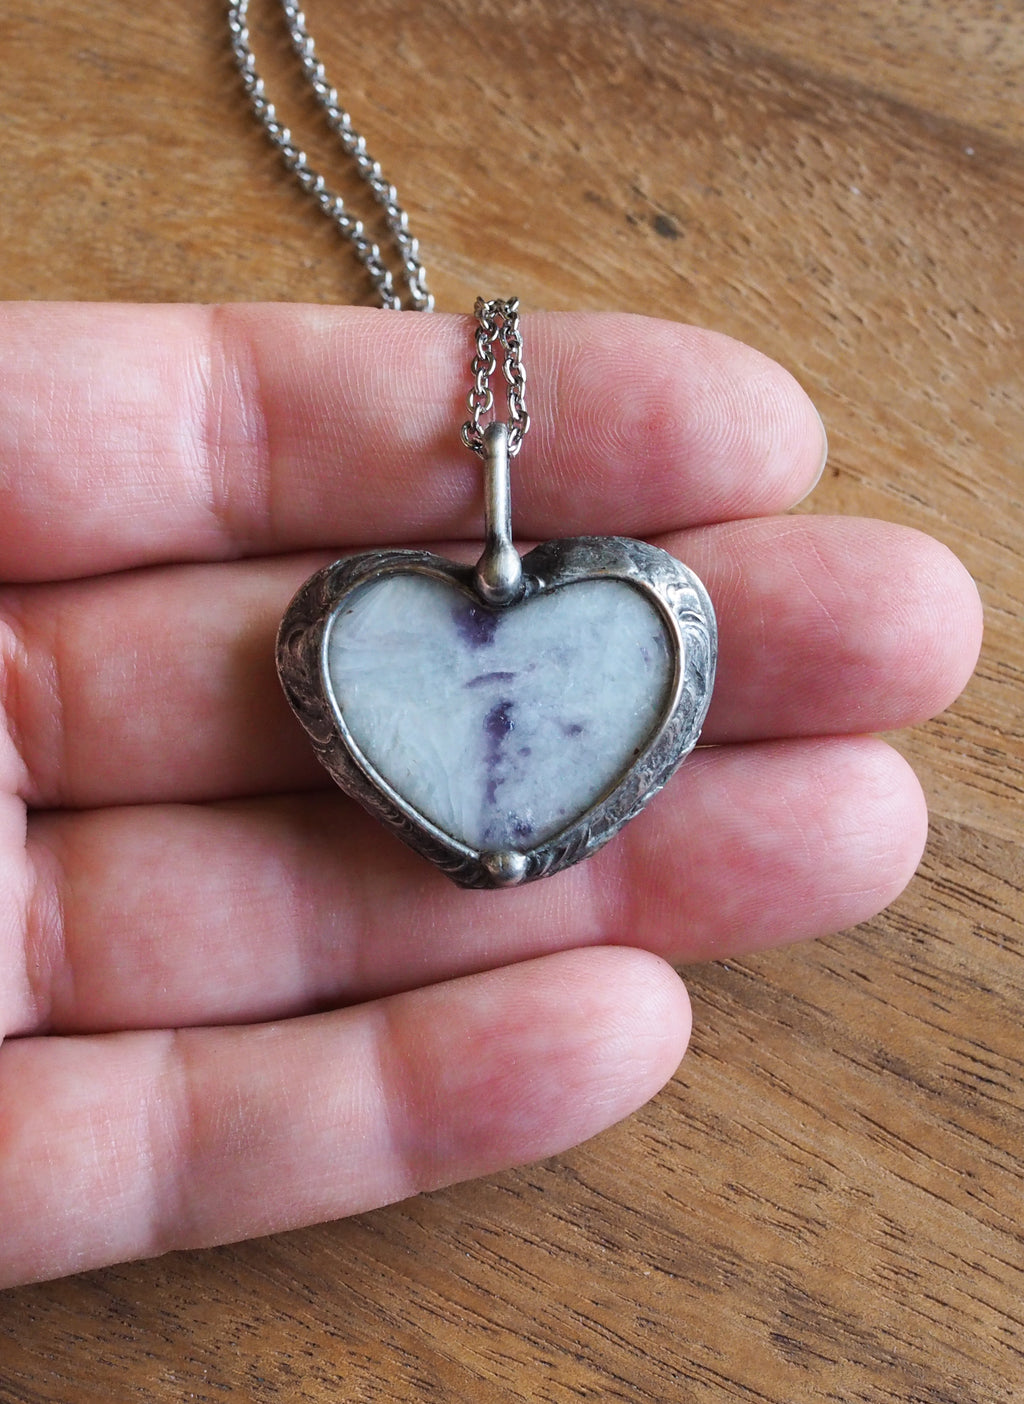 purple and sparkly white heart shaped healing crystal talisman necklace in palm of hand